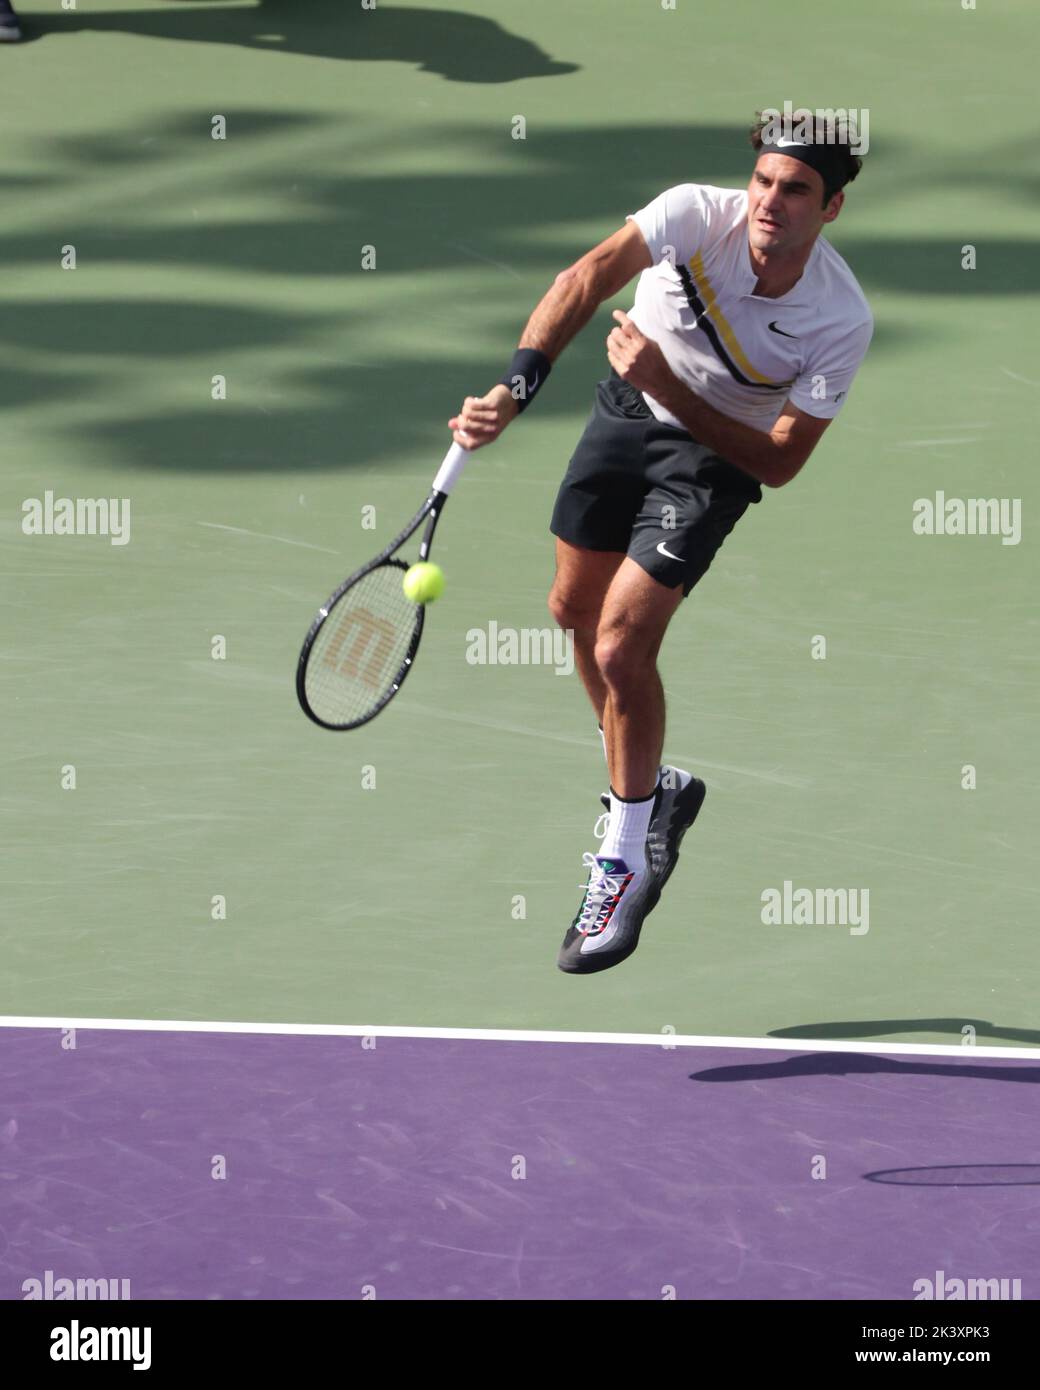 KEY BISCAYNE, FL - MARCH 24: Roger Federer during day 6 of the Miami Open Presented by Itau at Crandon Park Tennis Center on March 24, 2018 in Key Biscayne, Florida. People: Roger Federer Credit: Storms Media Group/Alamy Live News Stock Photo